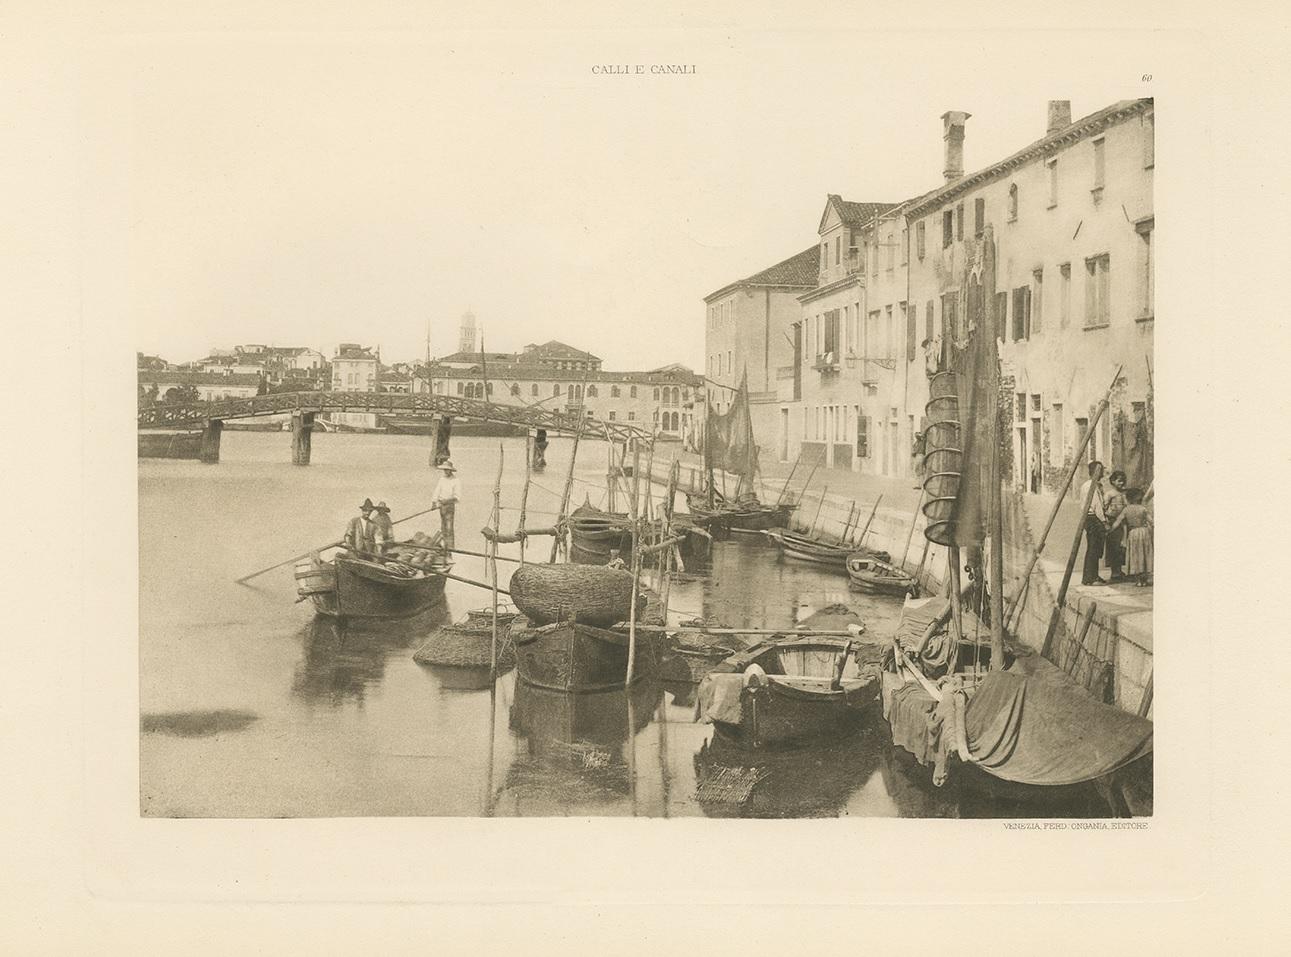 Photogravure of a canal in the Giudecca Island of Venice, Italy. Giudecca is an island in the Venetian Lagoon, in northern Italy. It is part of the sestiere of Dorsoduro and is a locality of the comune of Venice.

This print originates from 'Calli